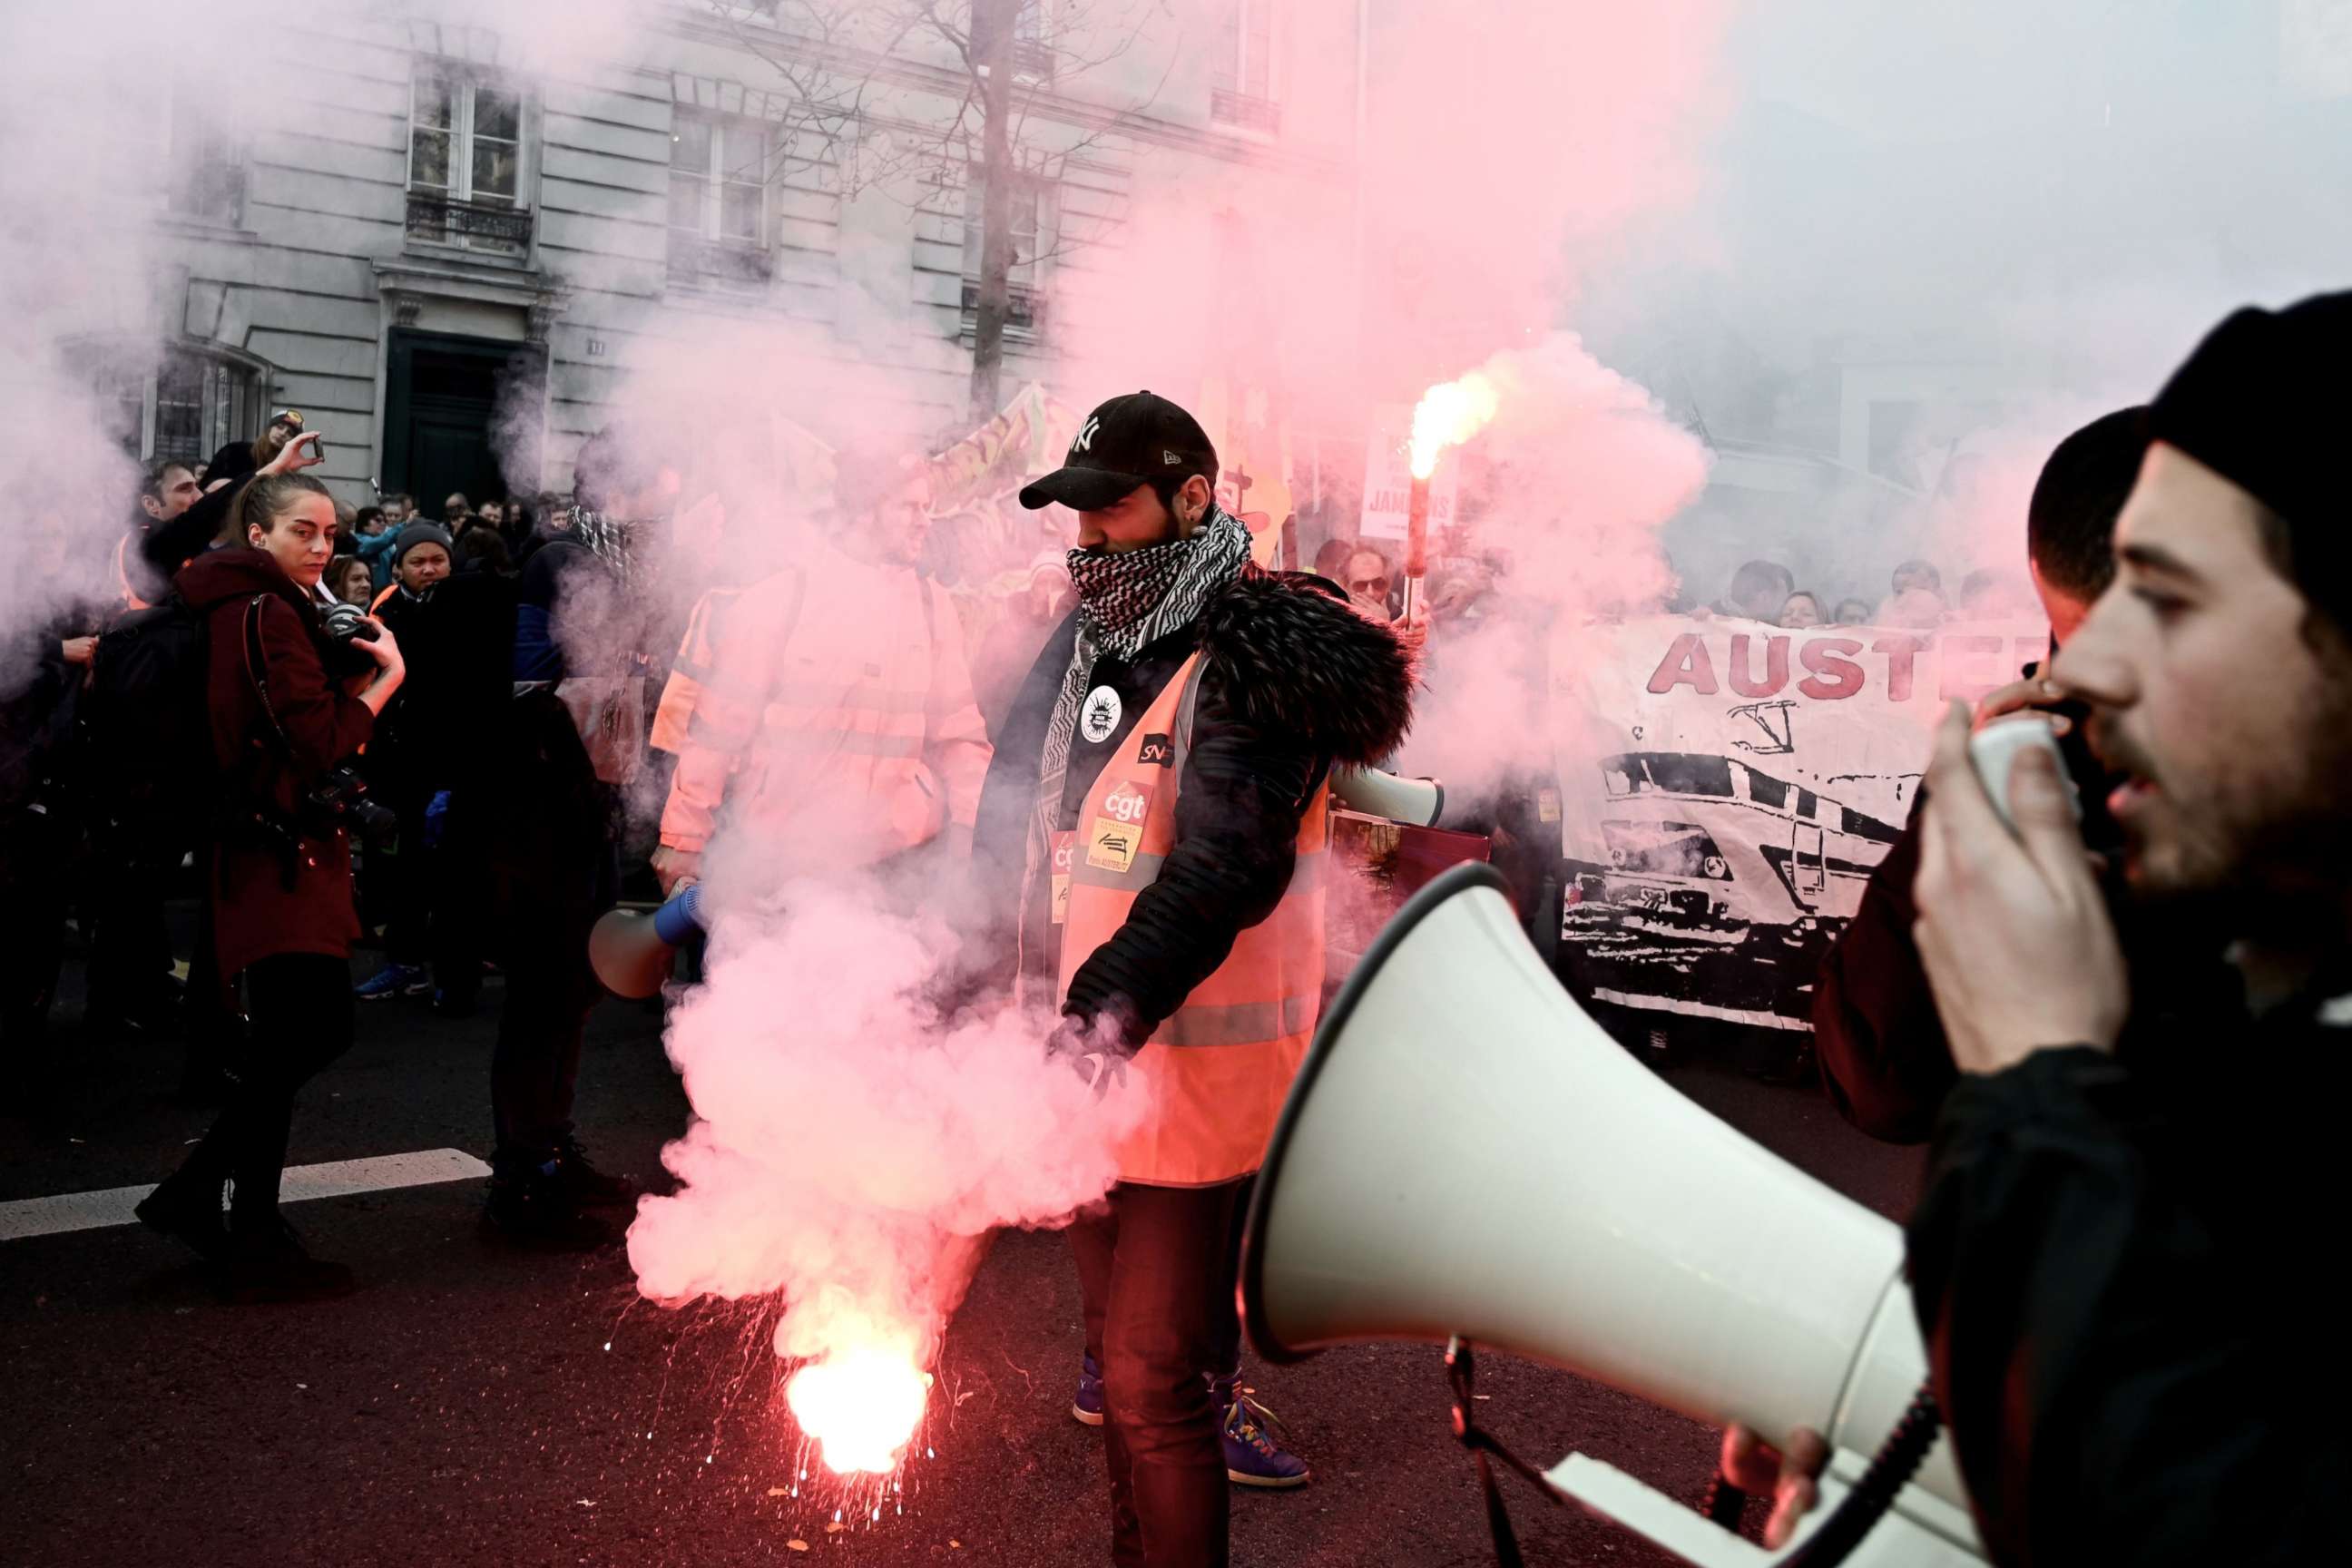 PHOTO: A man with a vest of the French state railway company SNCF burns flares next to a man speaking in a loud speaker during a demonstration in Paris, Dec. 17, 2019.